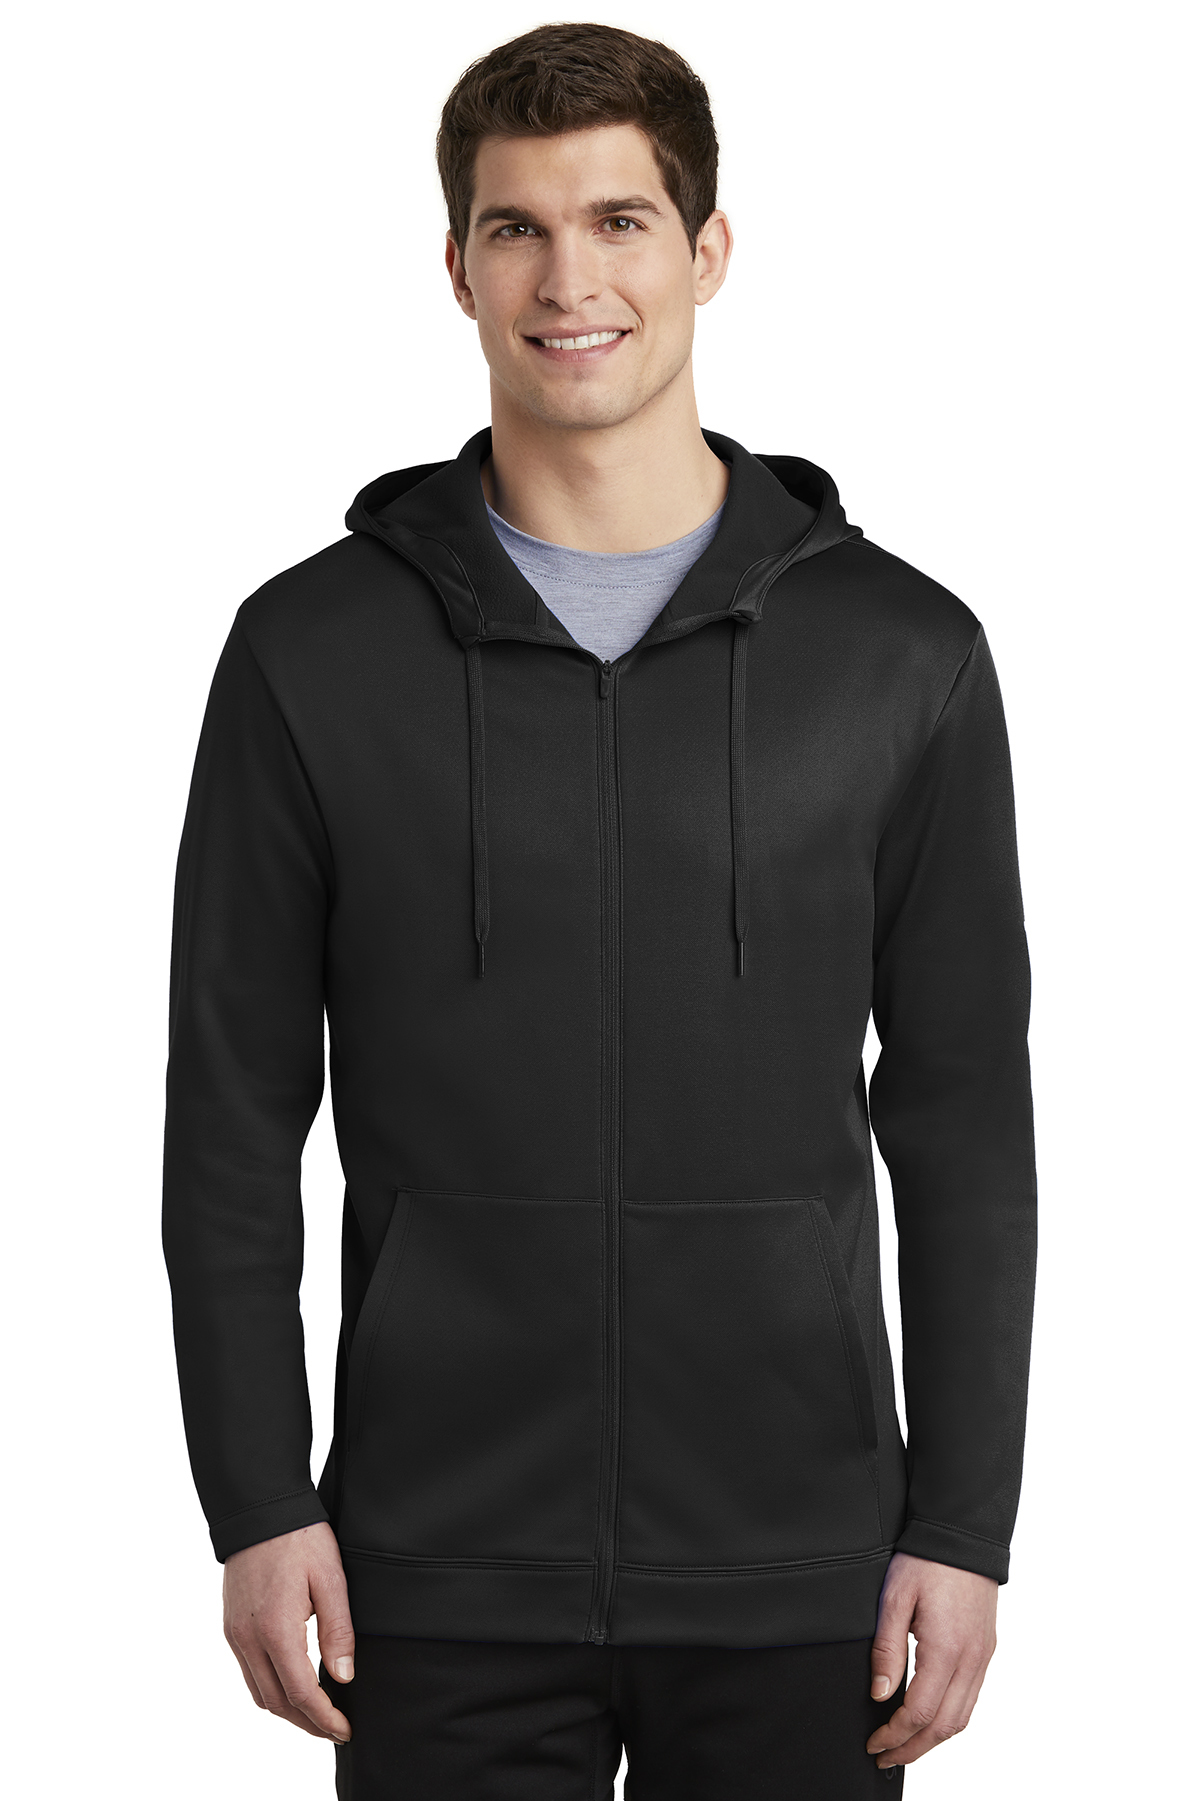 Nike Therma-FIT Full-Zip Fleece Hoodie | Product | Company Casuals